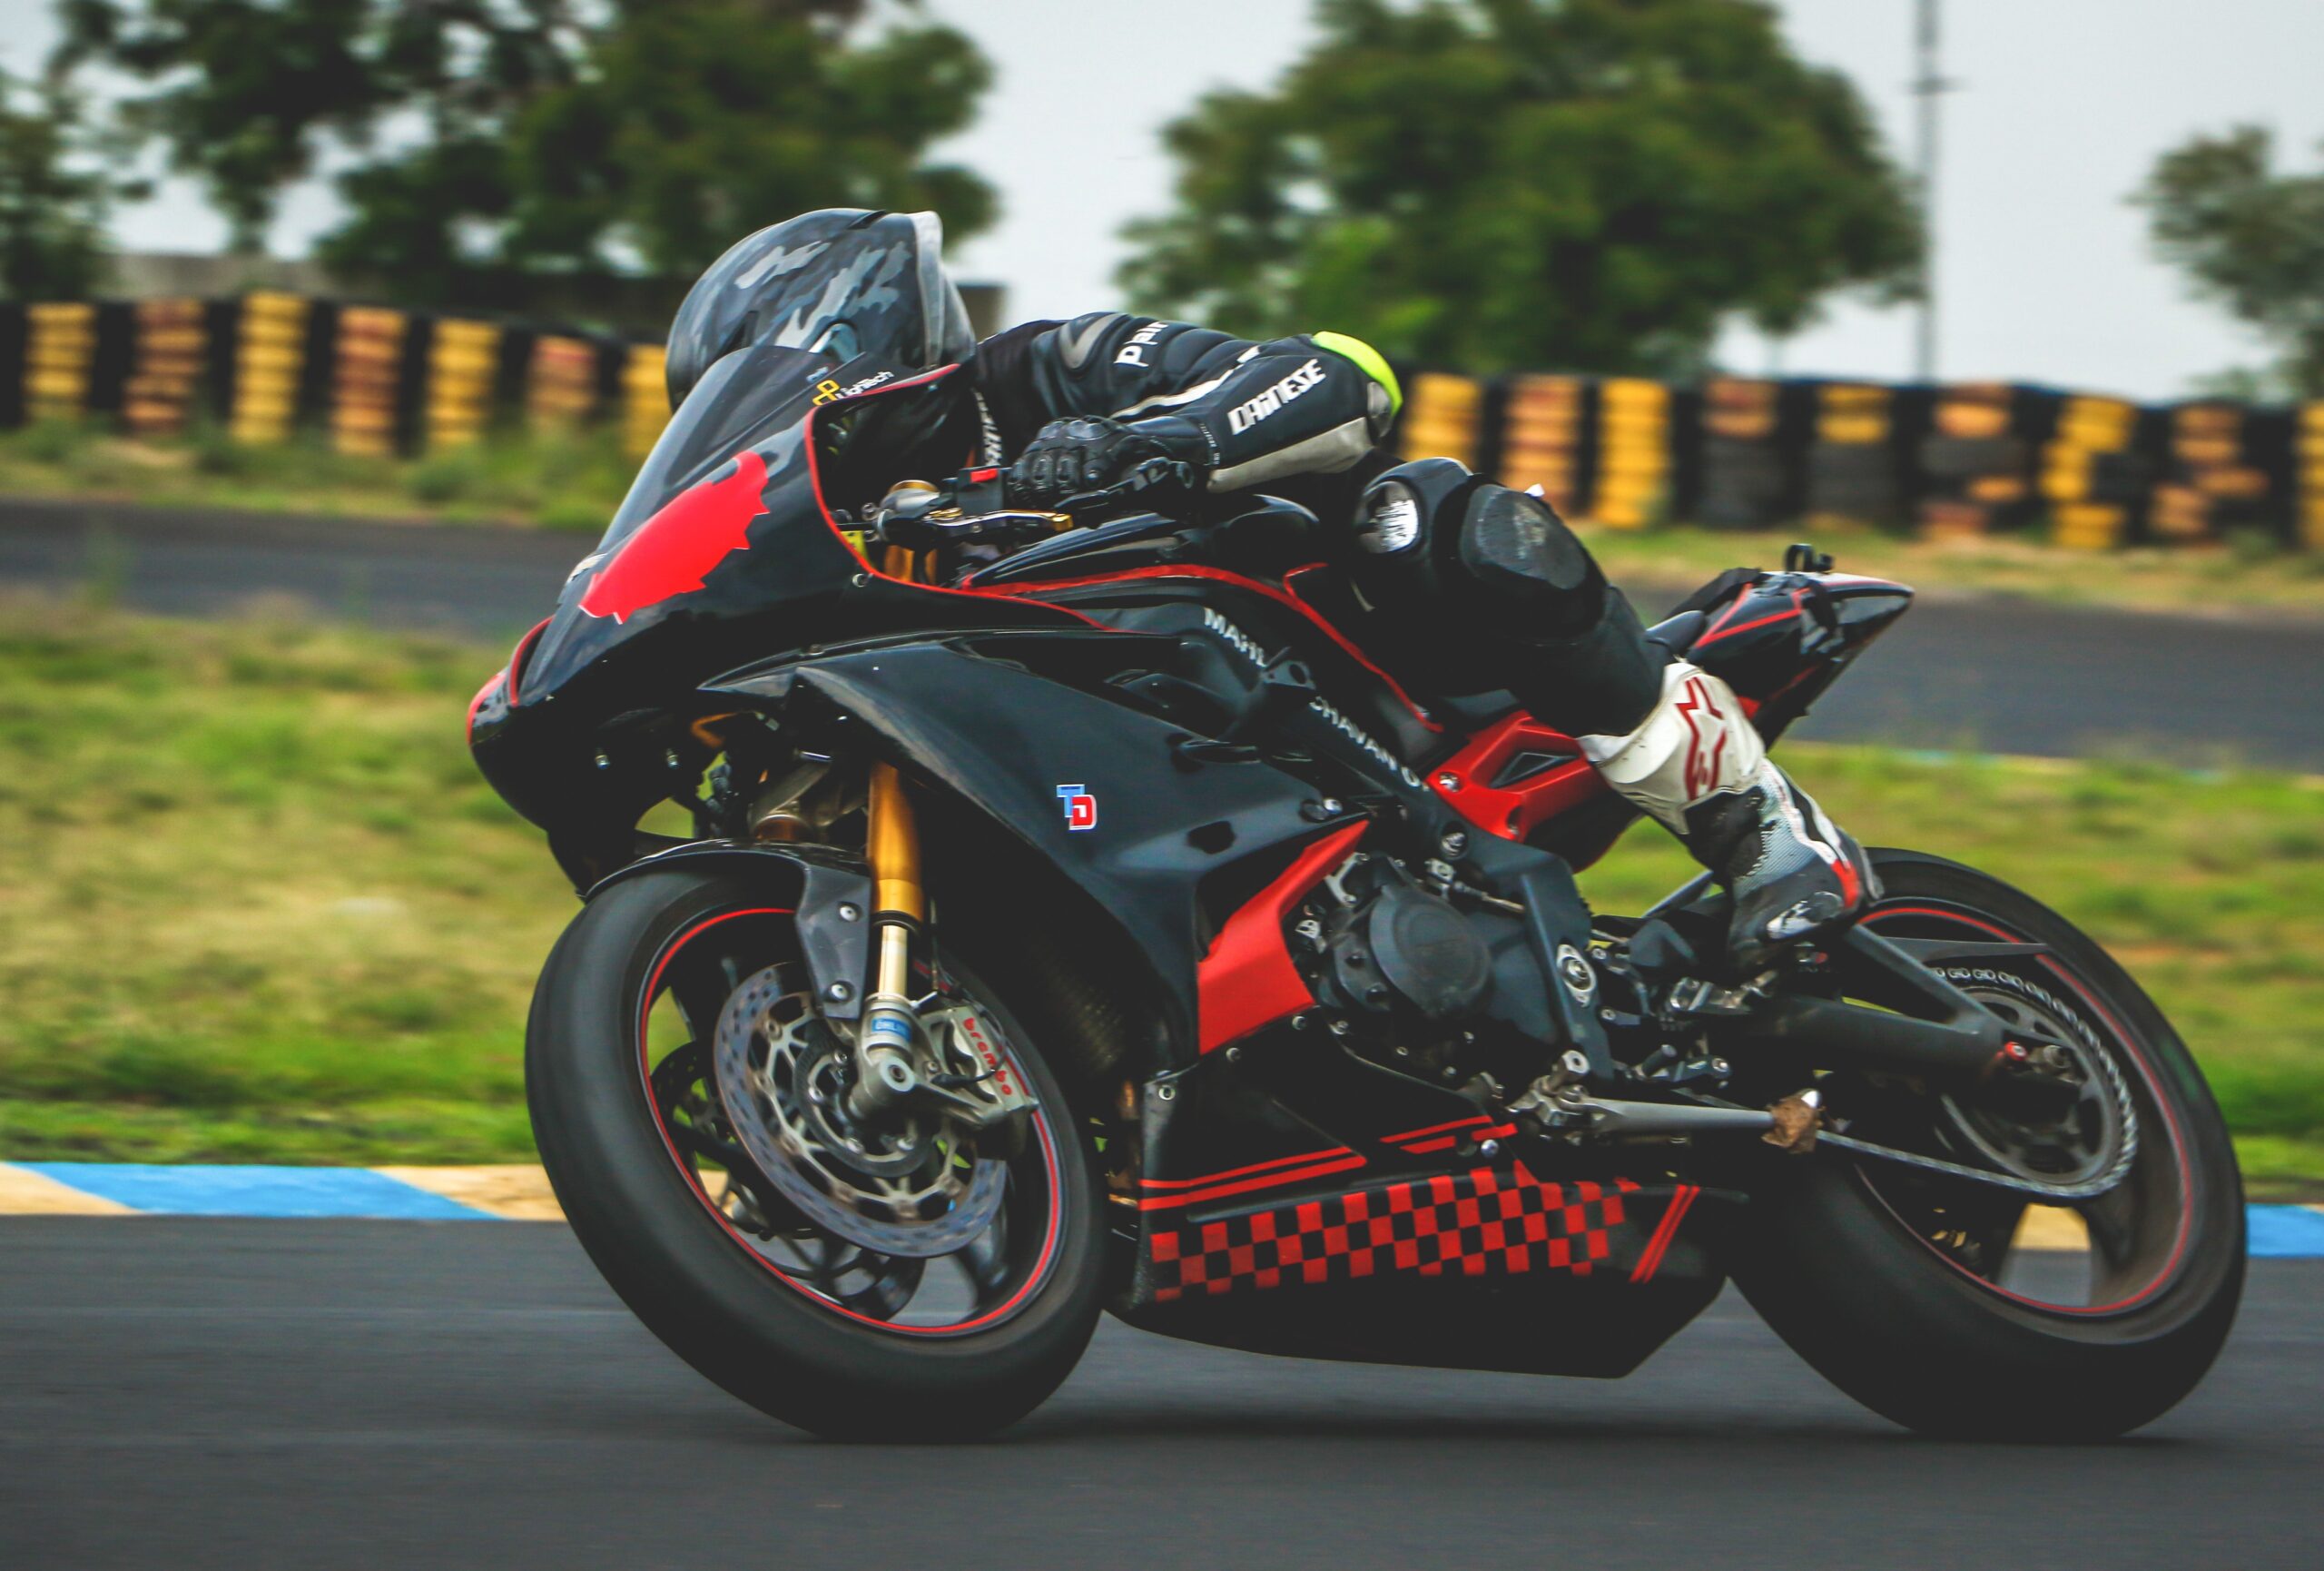 The Top 10 fastest motorcycles in the world.